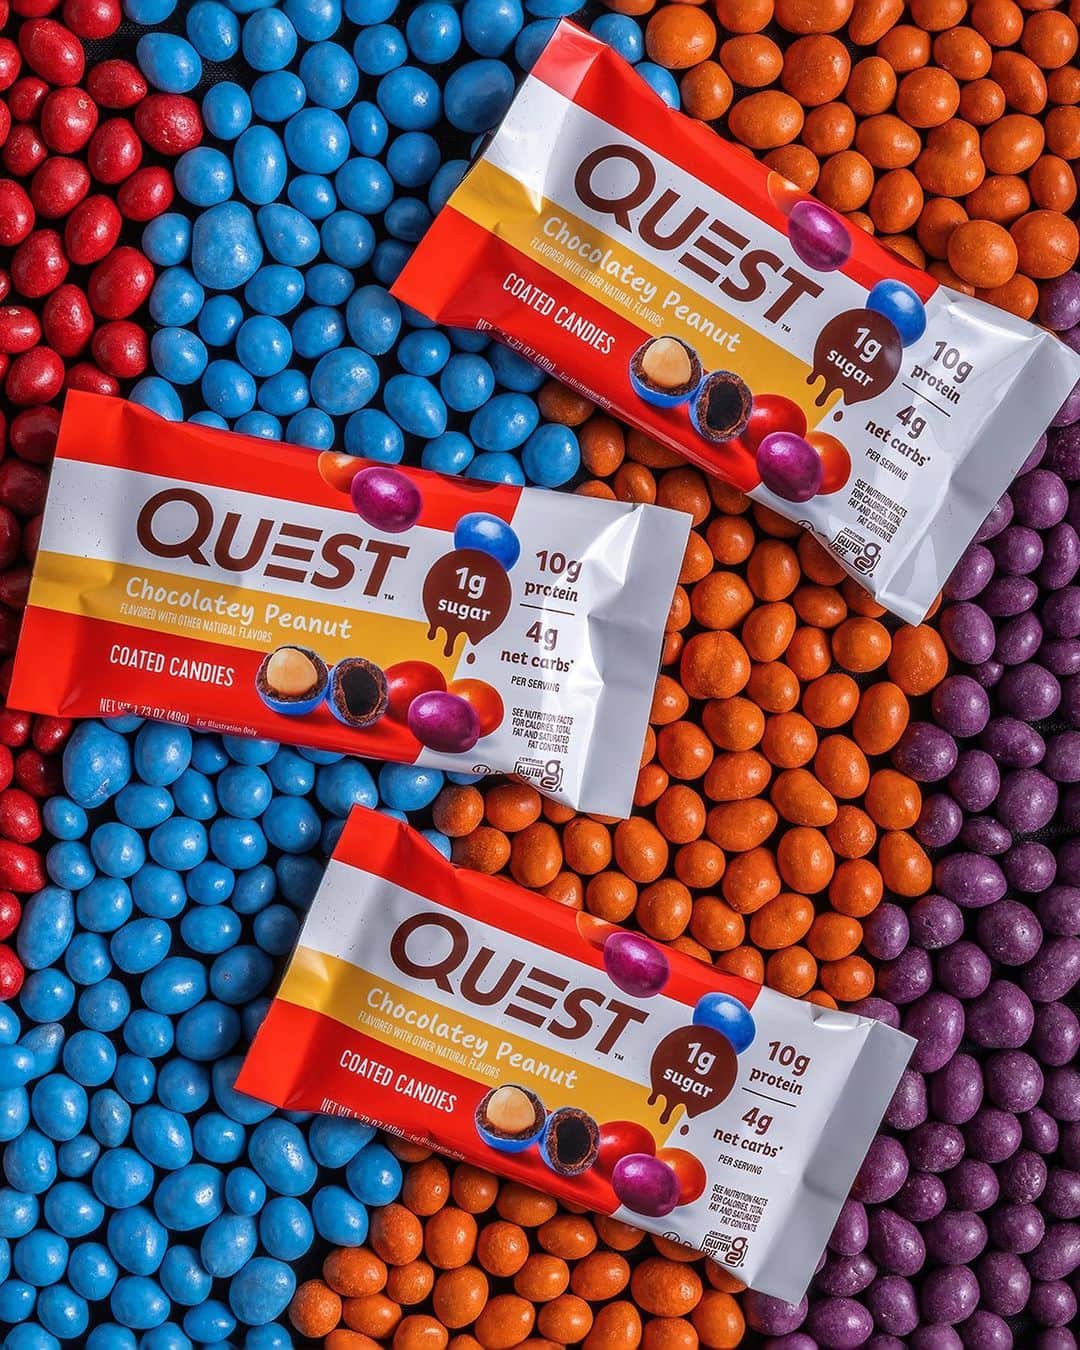 questnutritionのインスタグラム：「DOUBLE TAP to welcome the Quest™ Chocolatey Peanut Coated Candies - 1g sugar, 10g protein, & 4g net carbs per bag! 💪🍬😋These delicious candies have a roasted peanut layered in decadent chocolatey coating encased in a crunchy shell - delivering indulgent flavor & athlete-worthy nutrition in a keto-friendly sweet treat. 😍  AVAILABLE NOW online & in stores at questnutrition.com, @Amazon, @Walmart, @VitaminShoppe, @GNCLiveWell, @HyVee (Midwest), @Wegmans (Northeast), @schnuckmarkets (Midwest), @HarrisTeeter (South), @HEB (Texas), @netrition & your local health/nutrition stores nationwide. #OnaQuest #QuestNutrition #QuestCoatedCandies #QuestCandy」